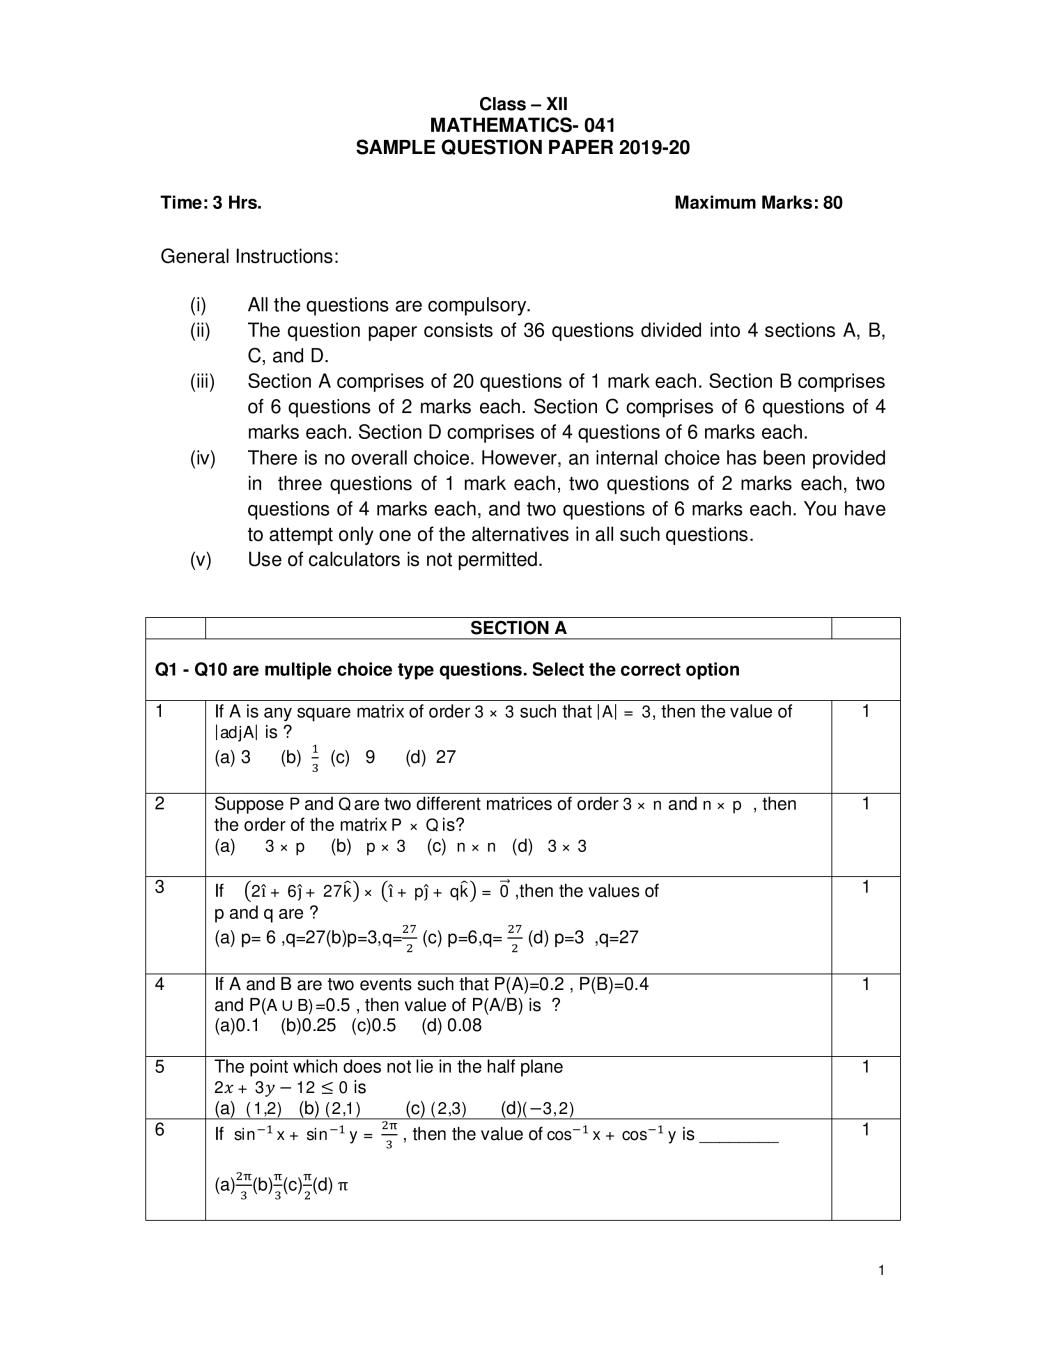 CBSE Class 12 Sample Paper 2020 for Mathematics - Page 1